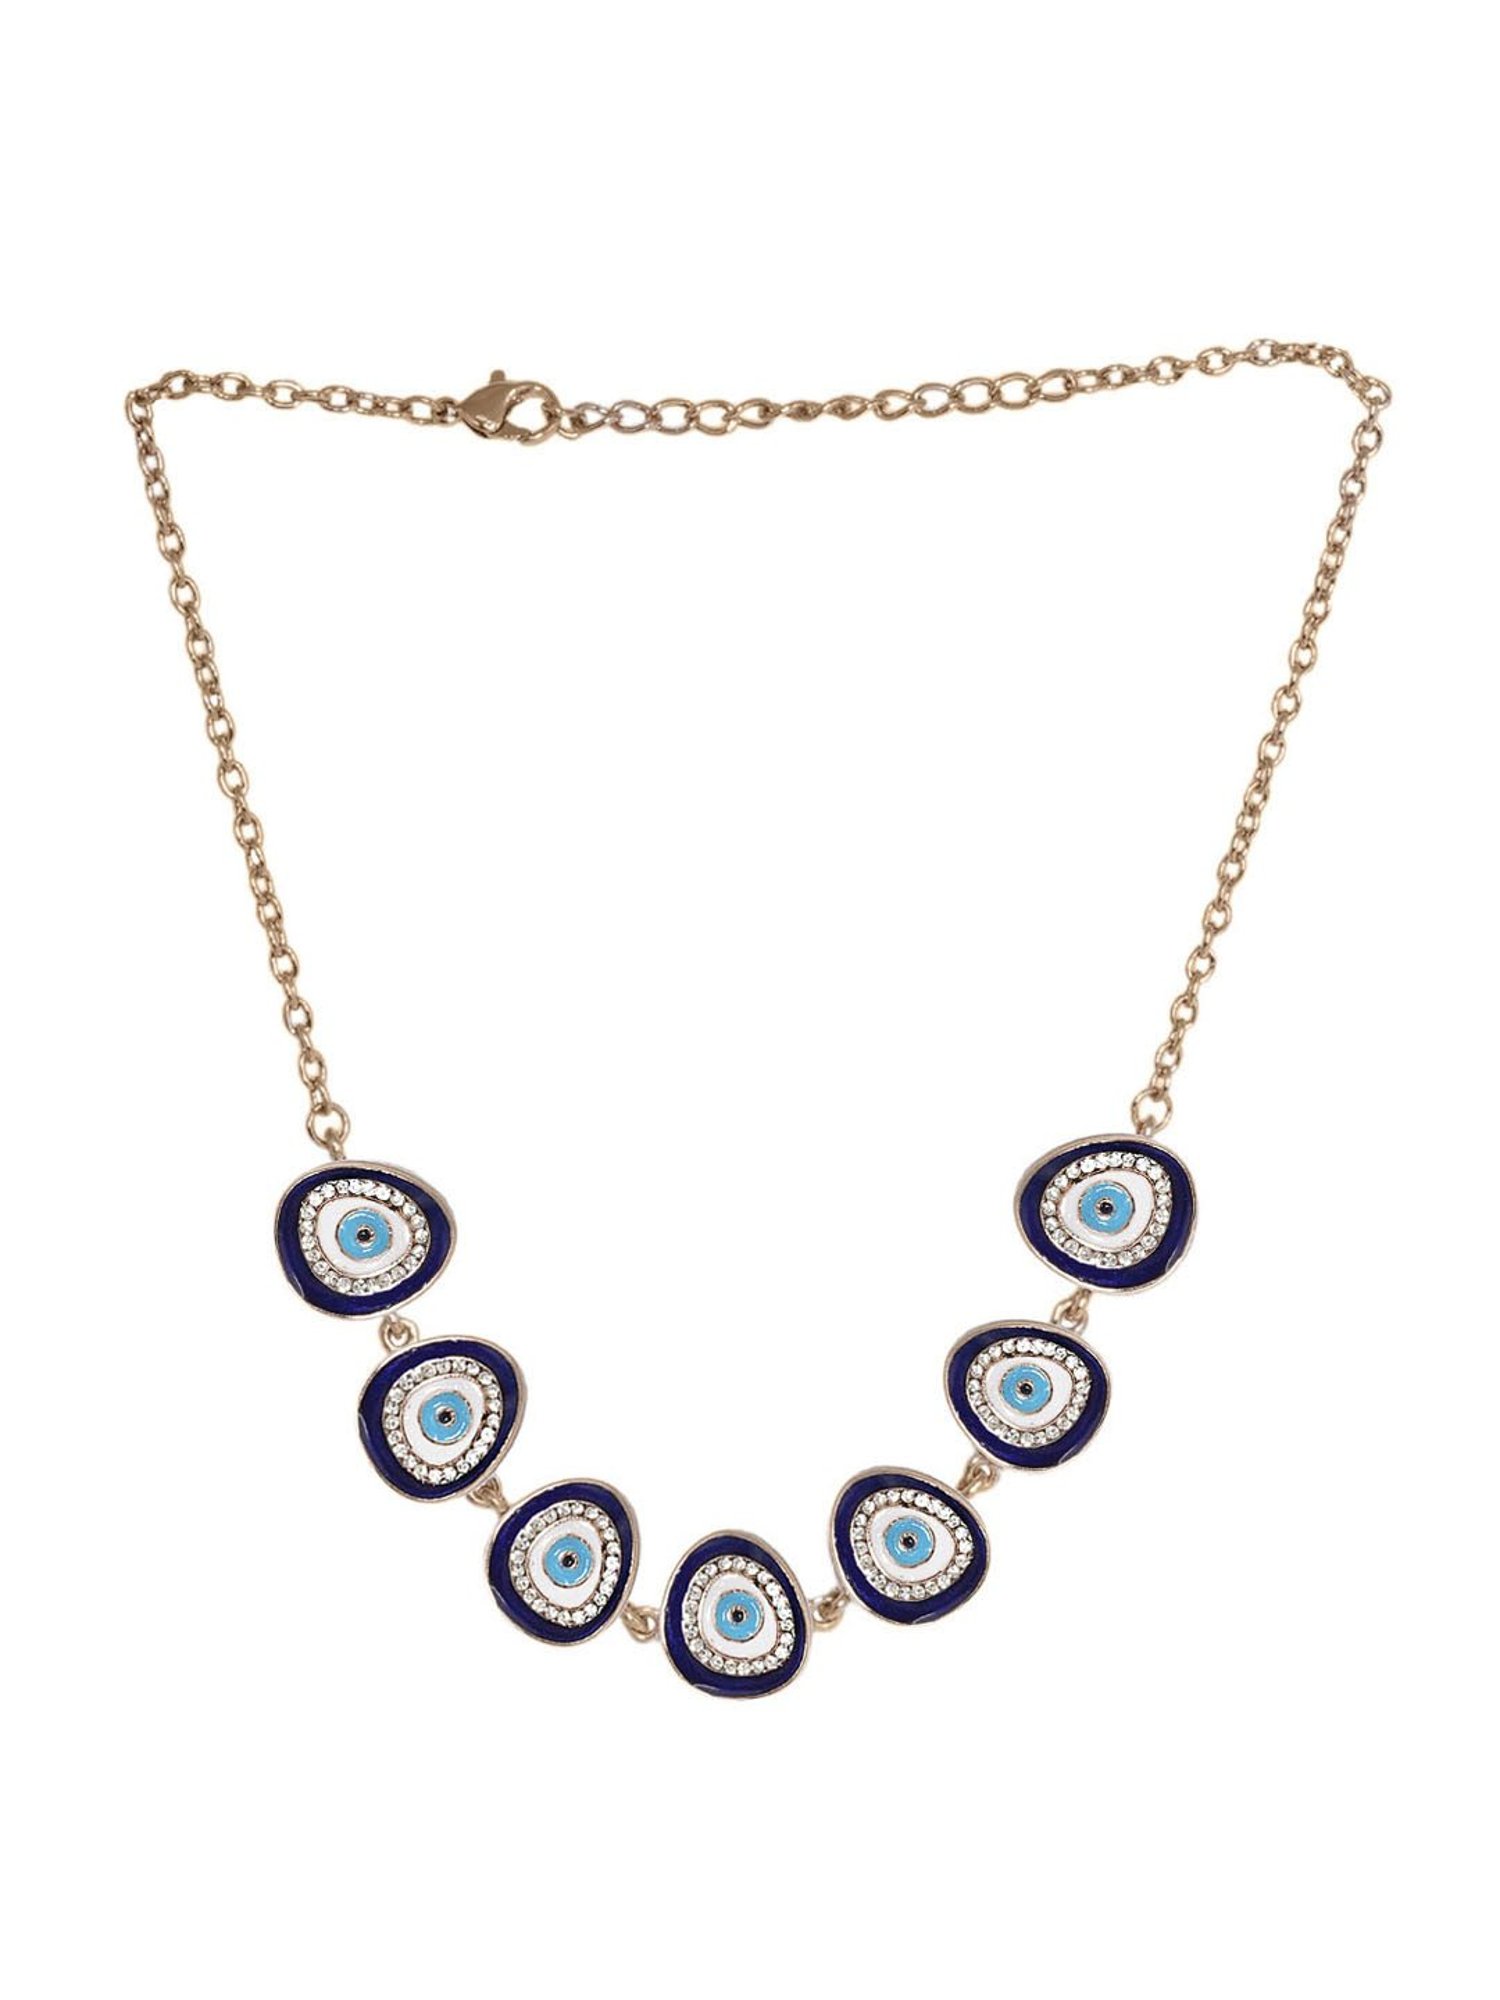 Royatto® Evil Eye Medallion PendantMesmerizing Duck Paddle Necklace Chain:  Unlock Your Playful Side